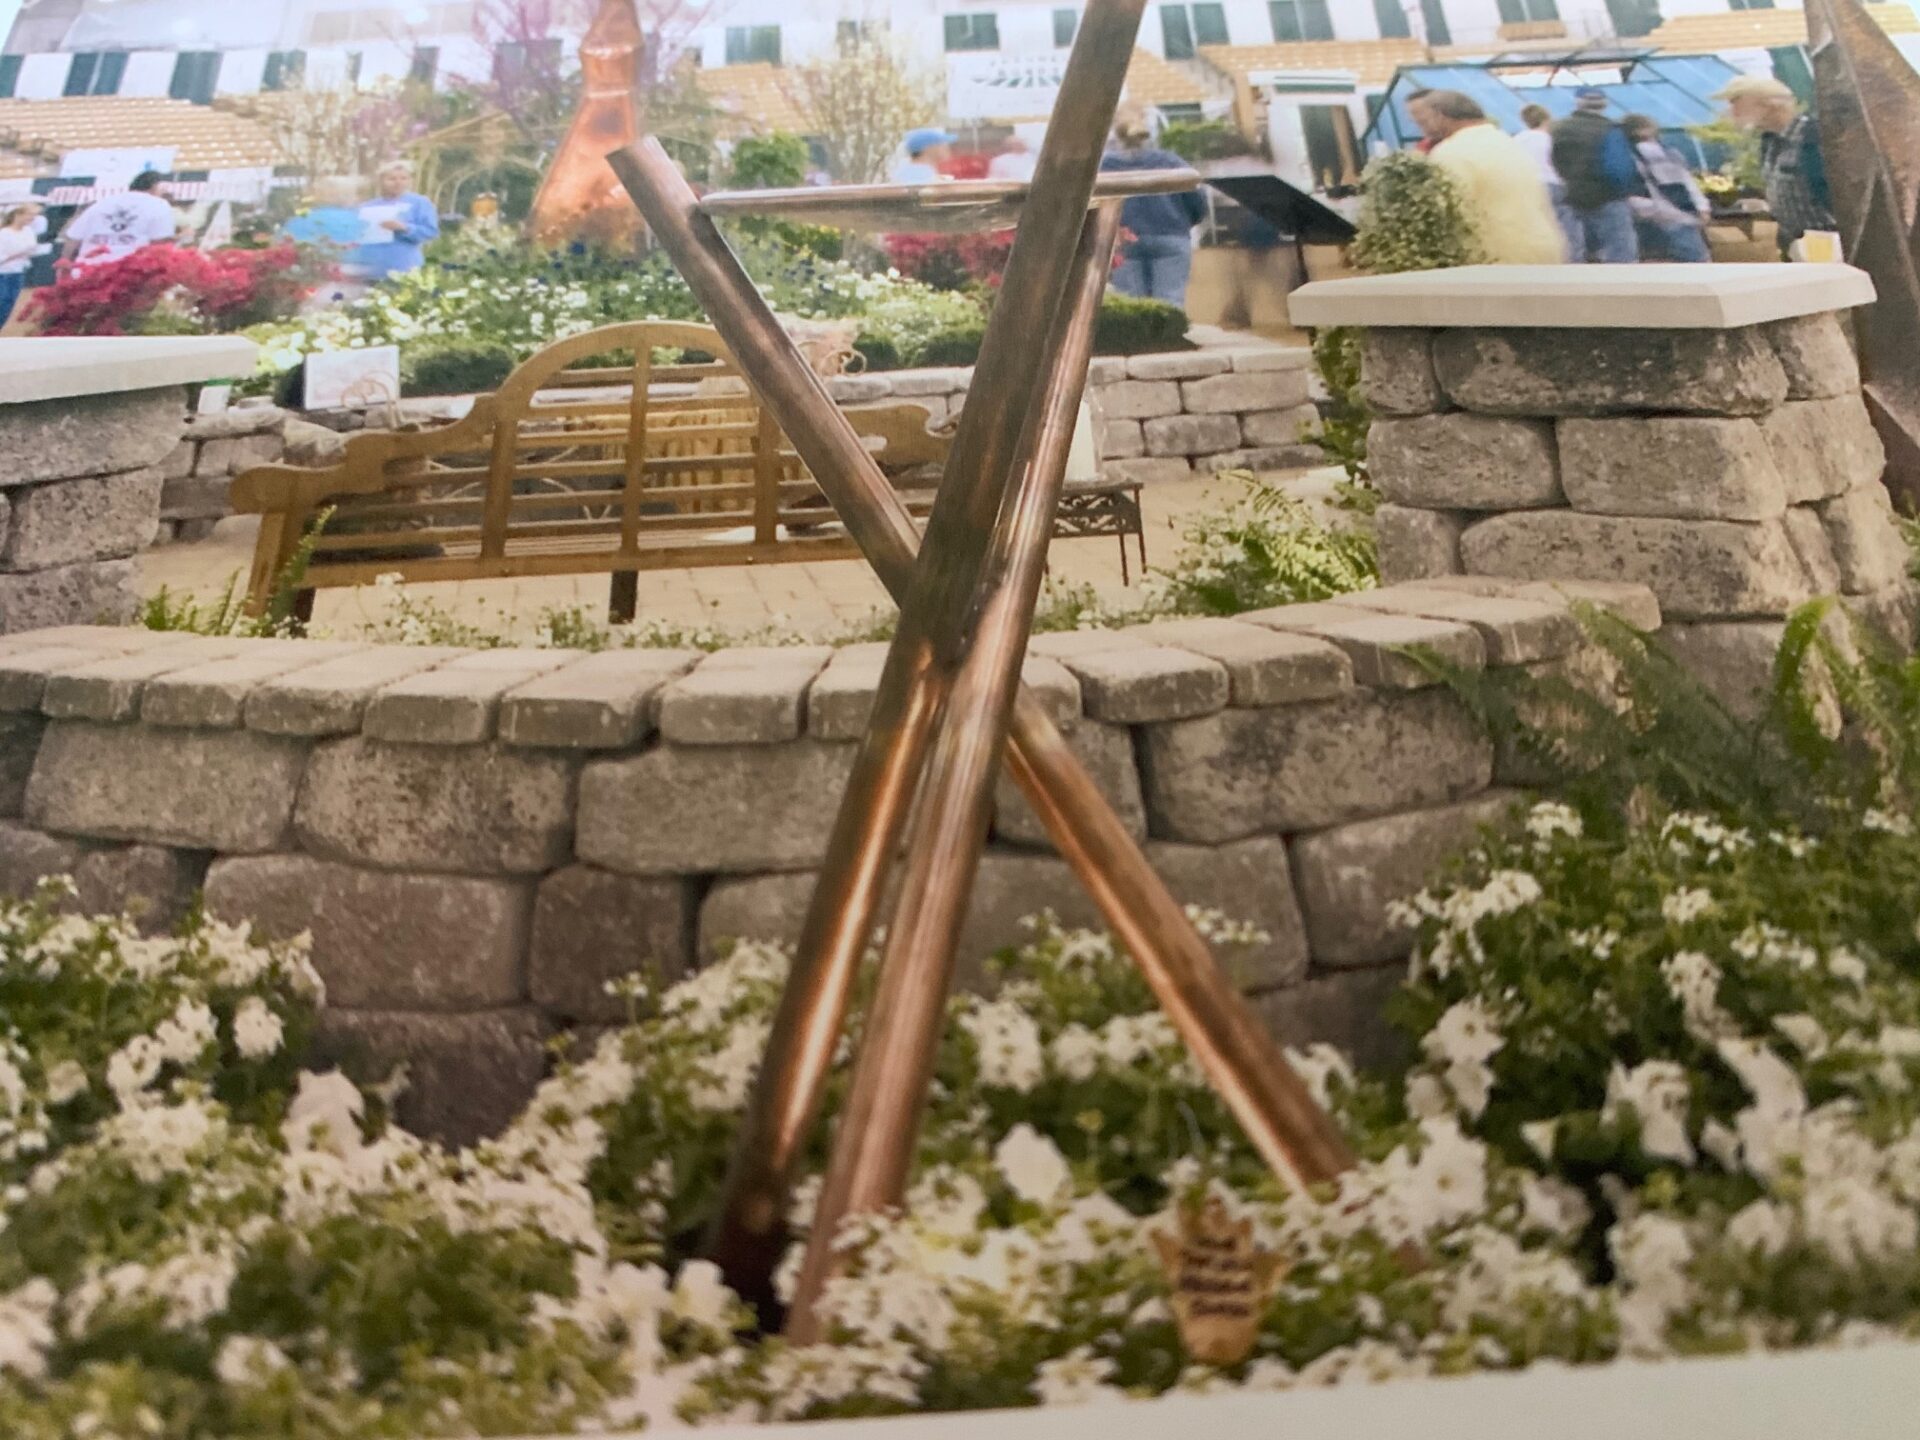 Powers Landscaping wins Gold Award for Best of Show at Bloom and Garden Williamson County Master Gardener Show